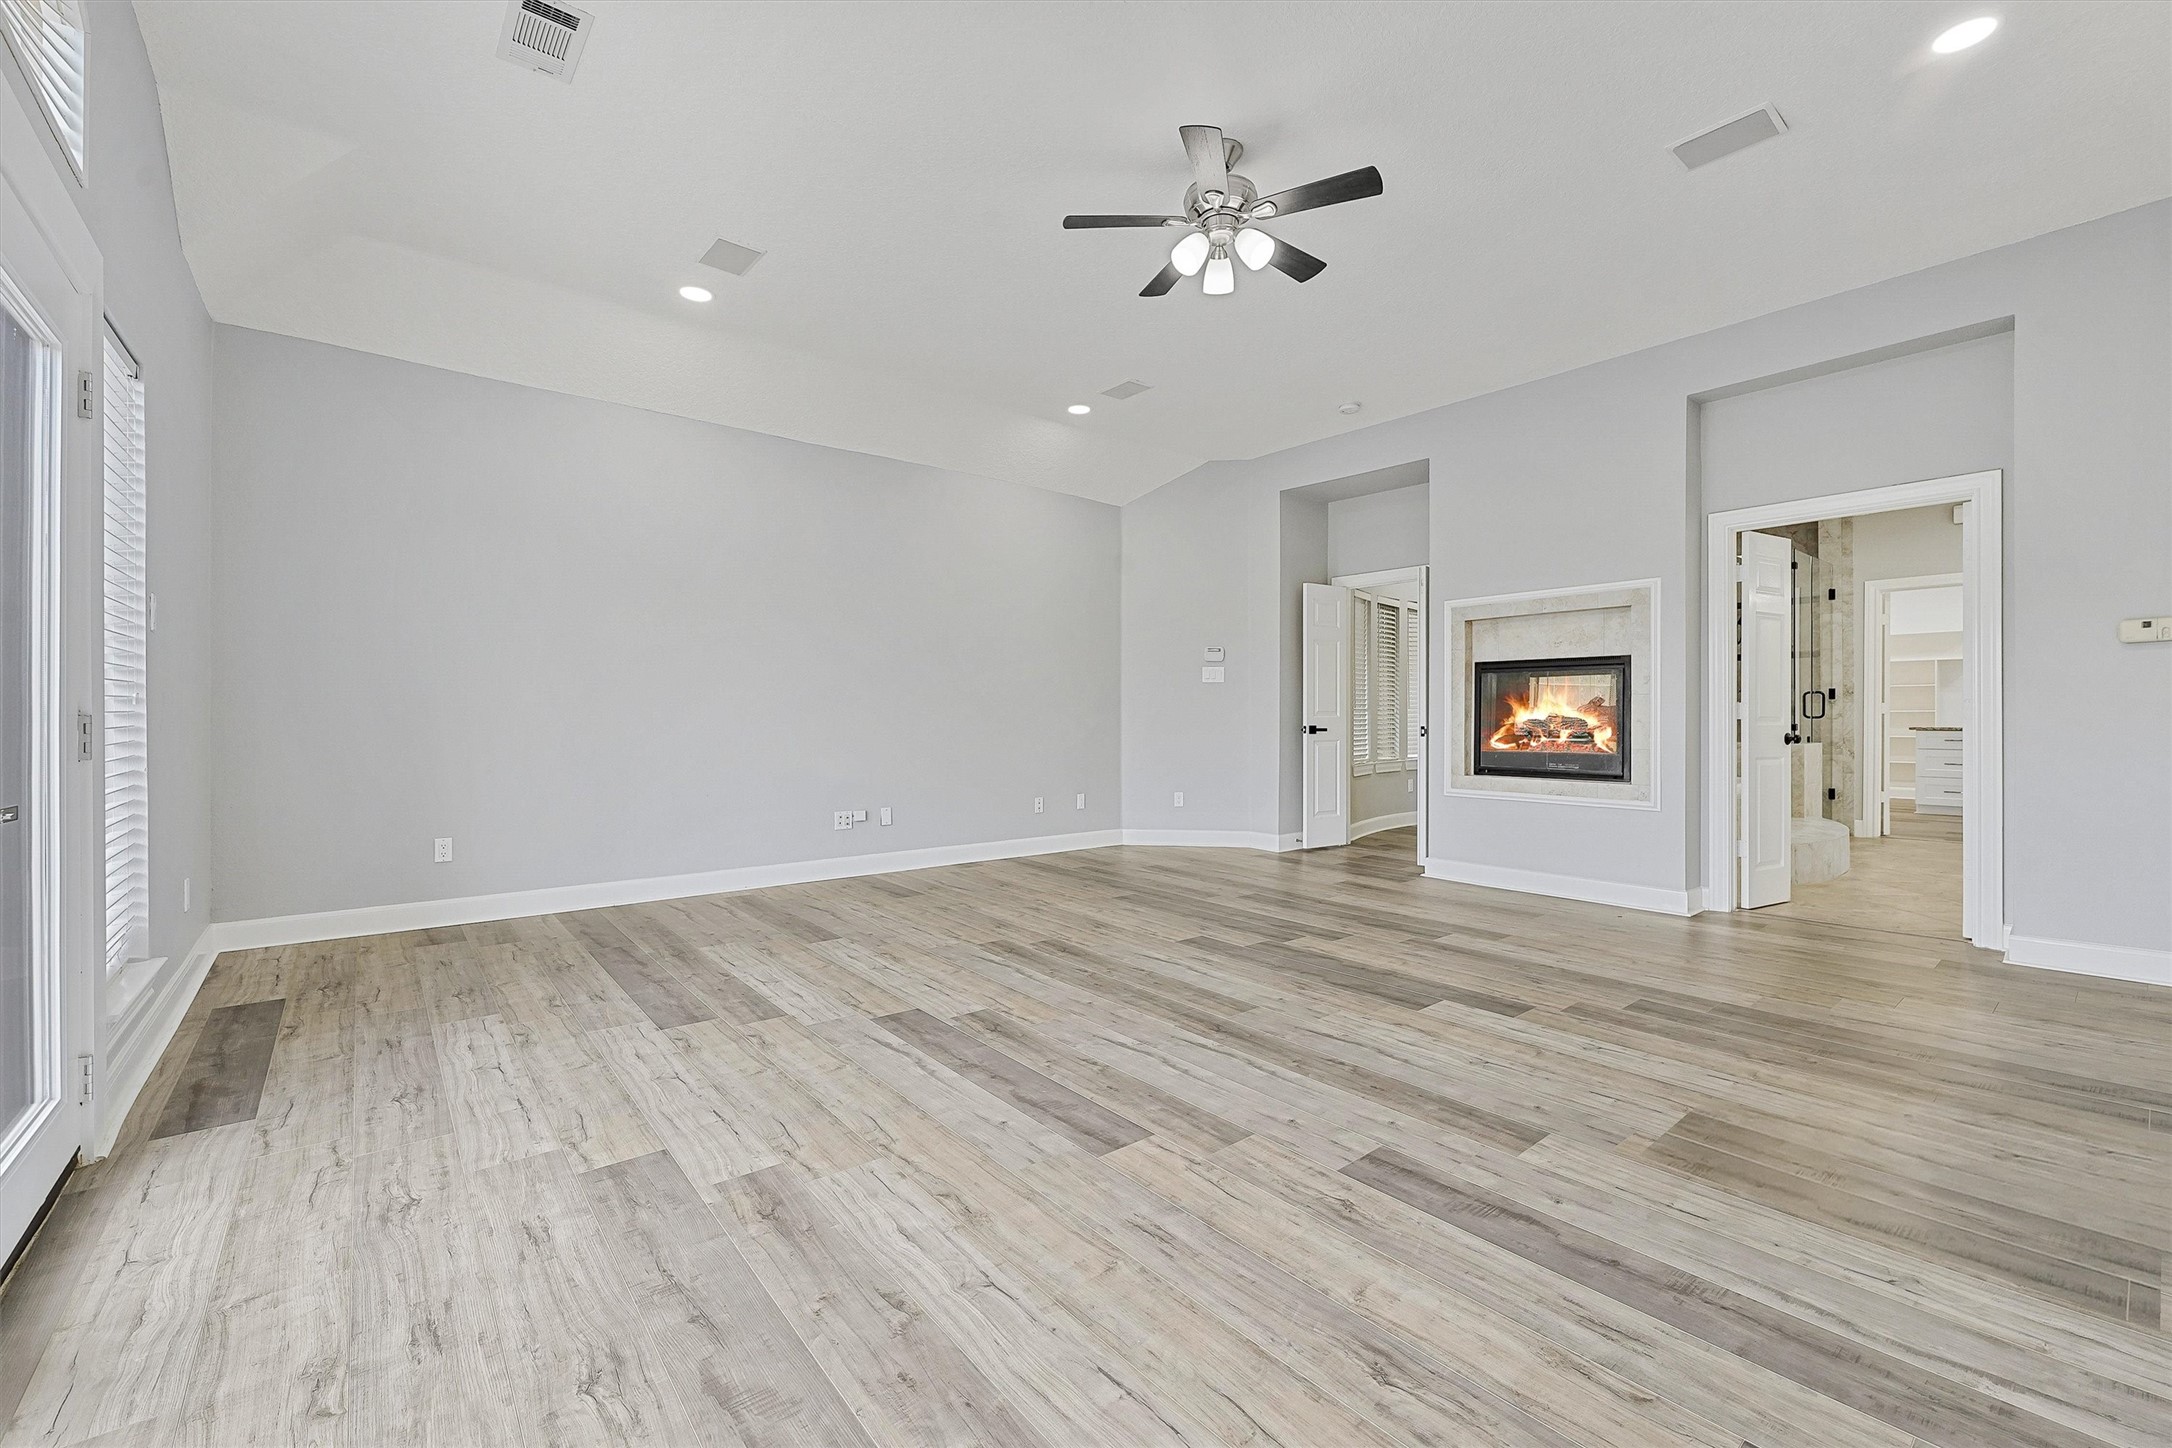 Complete with its own fireplace. Without virtual staging.